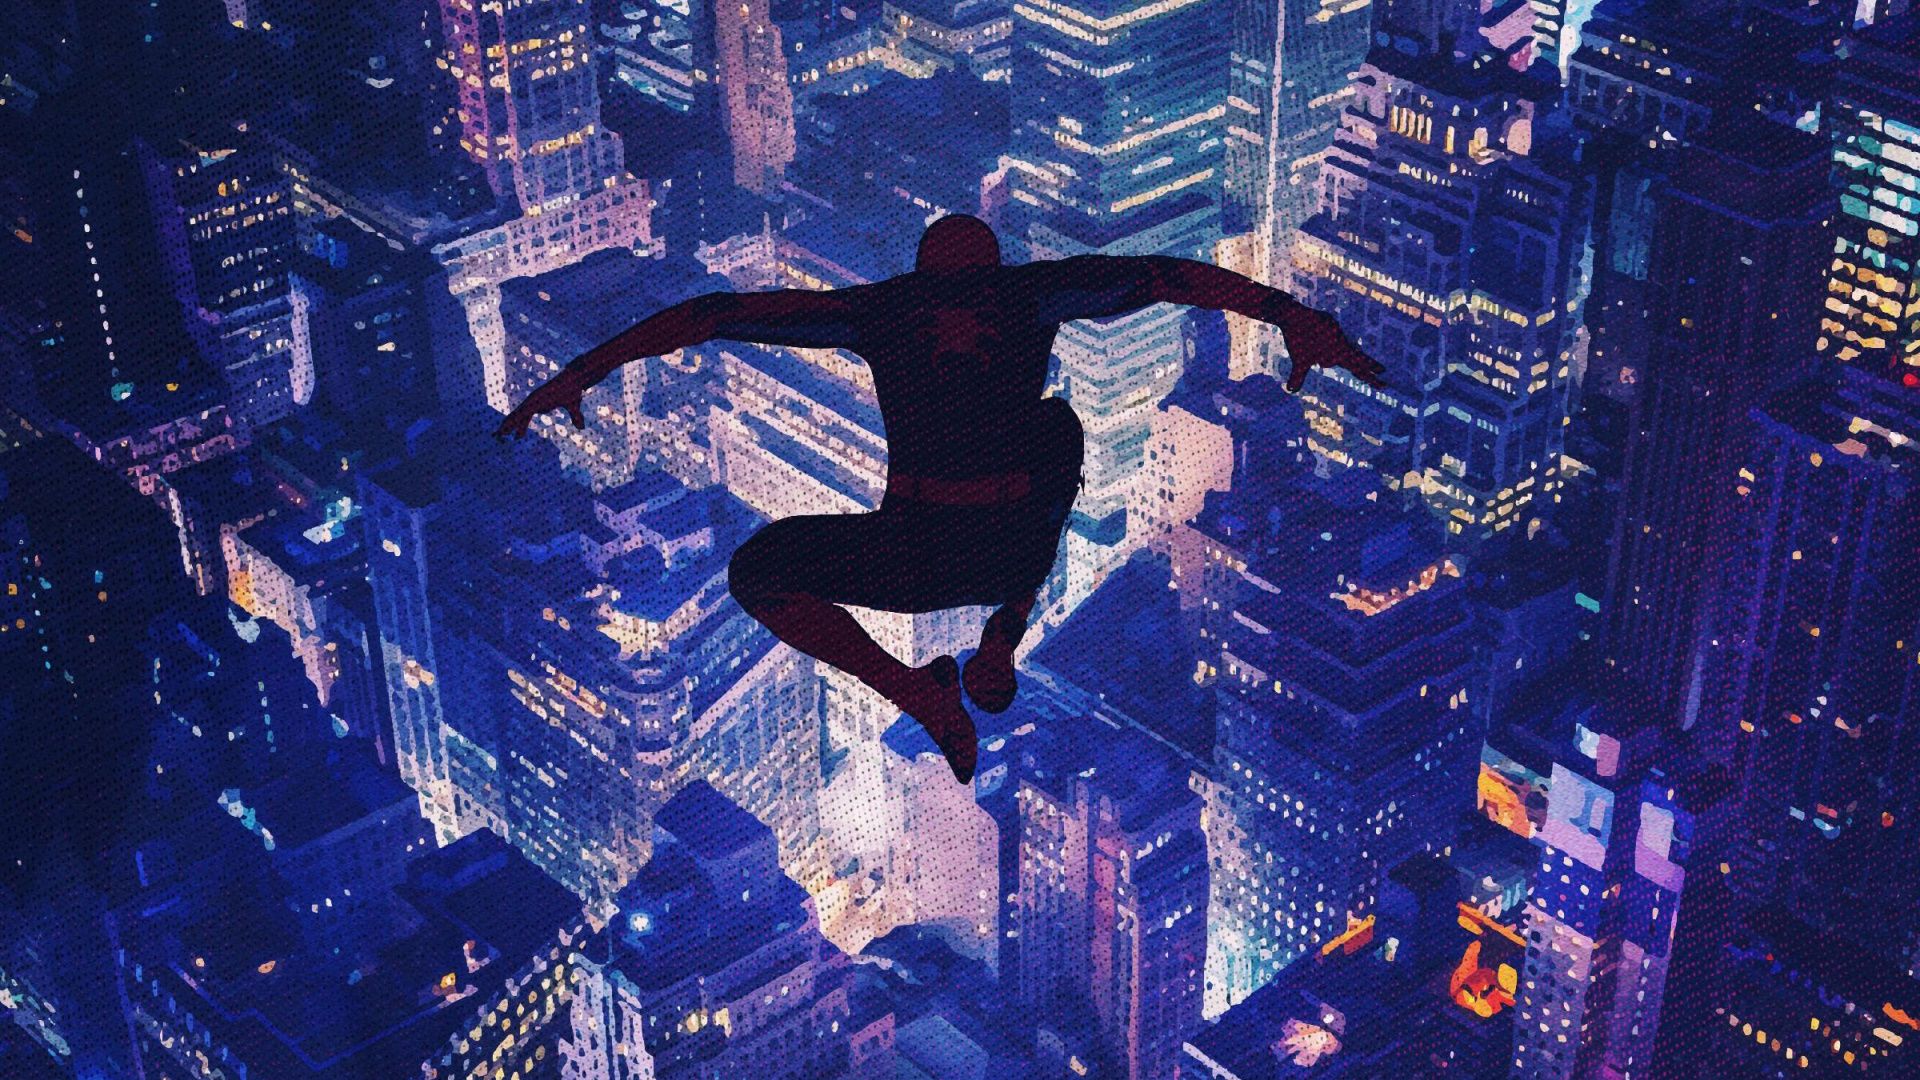 Download Spider Man (PS4), Video Game, Cityscape, Fan Art